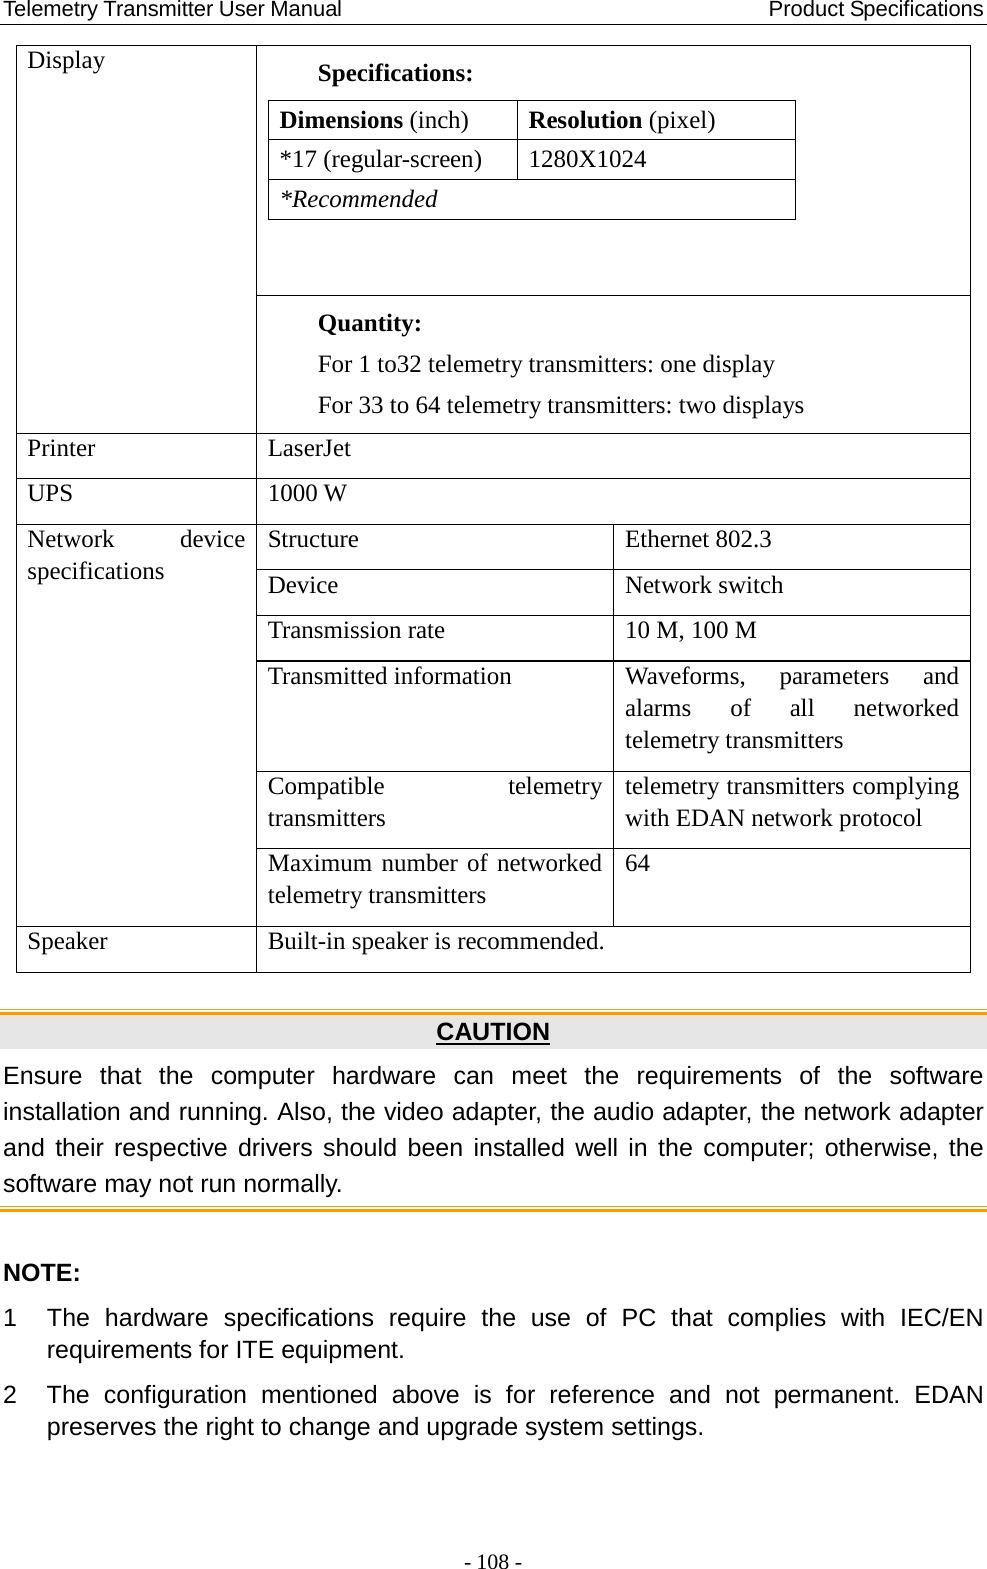 Telemetry Transmitter User Manual                                       Product Specifications   Display Specifications: Dimensions (inch)  Resolution (pixel) *17 (regular-screen)  1280X1024 *Recommended  Quantity: For 1 to32 telemetry transmitters: one display For 33 to 64 telemetry transmitters: two displays Printer   LaserJet UPS 1000 W Network device specifications Structure Ethernet 802.3 Device Network switch Transmission rate 10 M, 100 M Transmitted information Waveforms, parameters and alarms of all networked telemetry transmitters Compatible  telemetry transmitters telemetry transmitters complying with EDAN network protocol   Maximum number of networked telemetry transmitters 64 Speaker Built-in speaker is recommended.  CAUTION Ensure that the computer hardware can meet the requirements of the software installation and running. Also, the video adapter, the audio adapter, the network adapter and their respective drivers should been installed well in the computer; otherwise, the software may not run normally.    NOTE: 1  The hardware specifications require the use of PC that complies with IEC/EN requirements for ITE equipment.   2  The configuration mentioned above is for reference and not permanent. EDAN preserves the right to change and upgrade system settings. - 108 - 